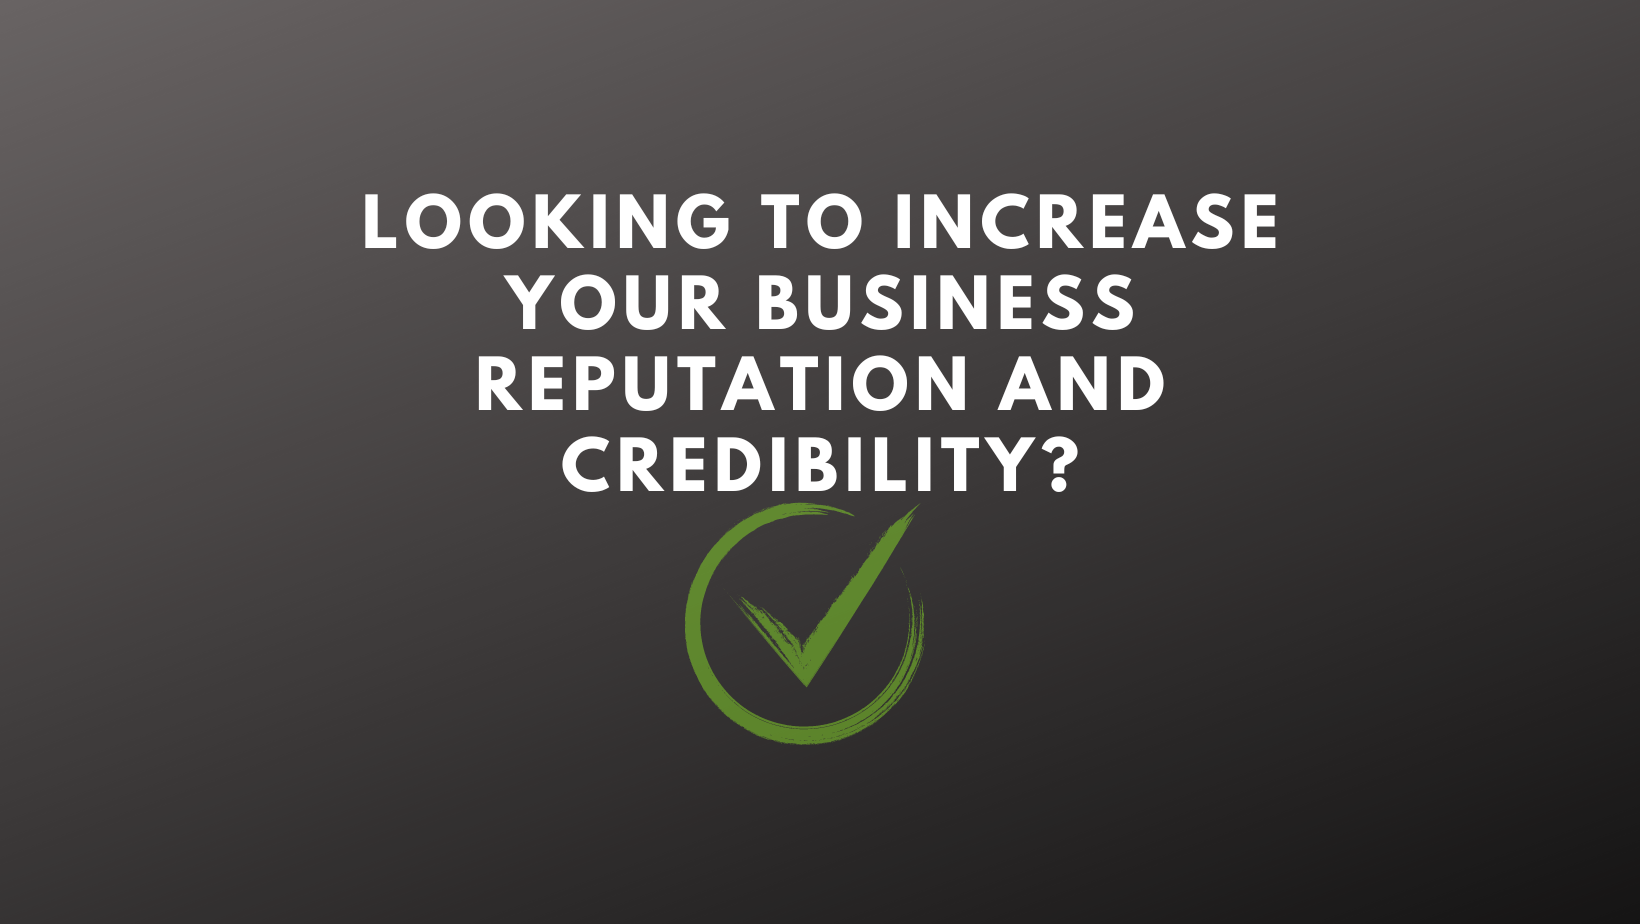 Looking to increase your business reputation and credibility?